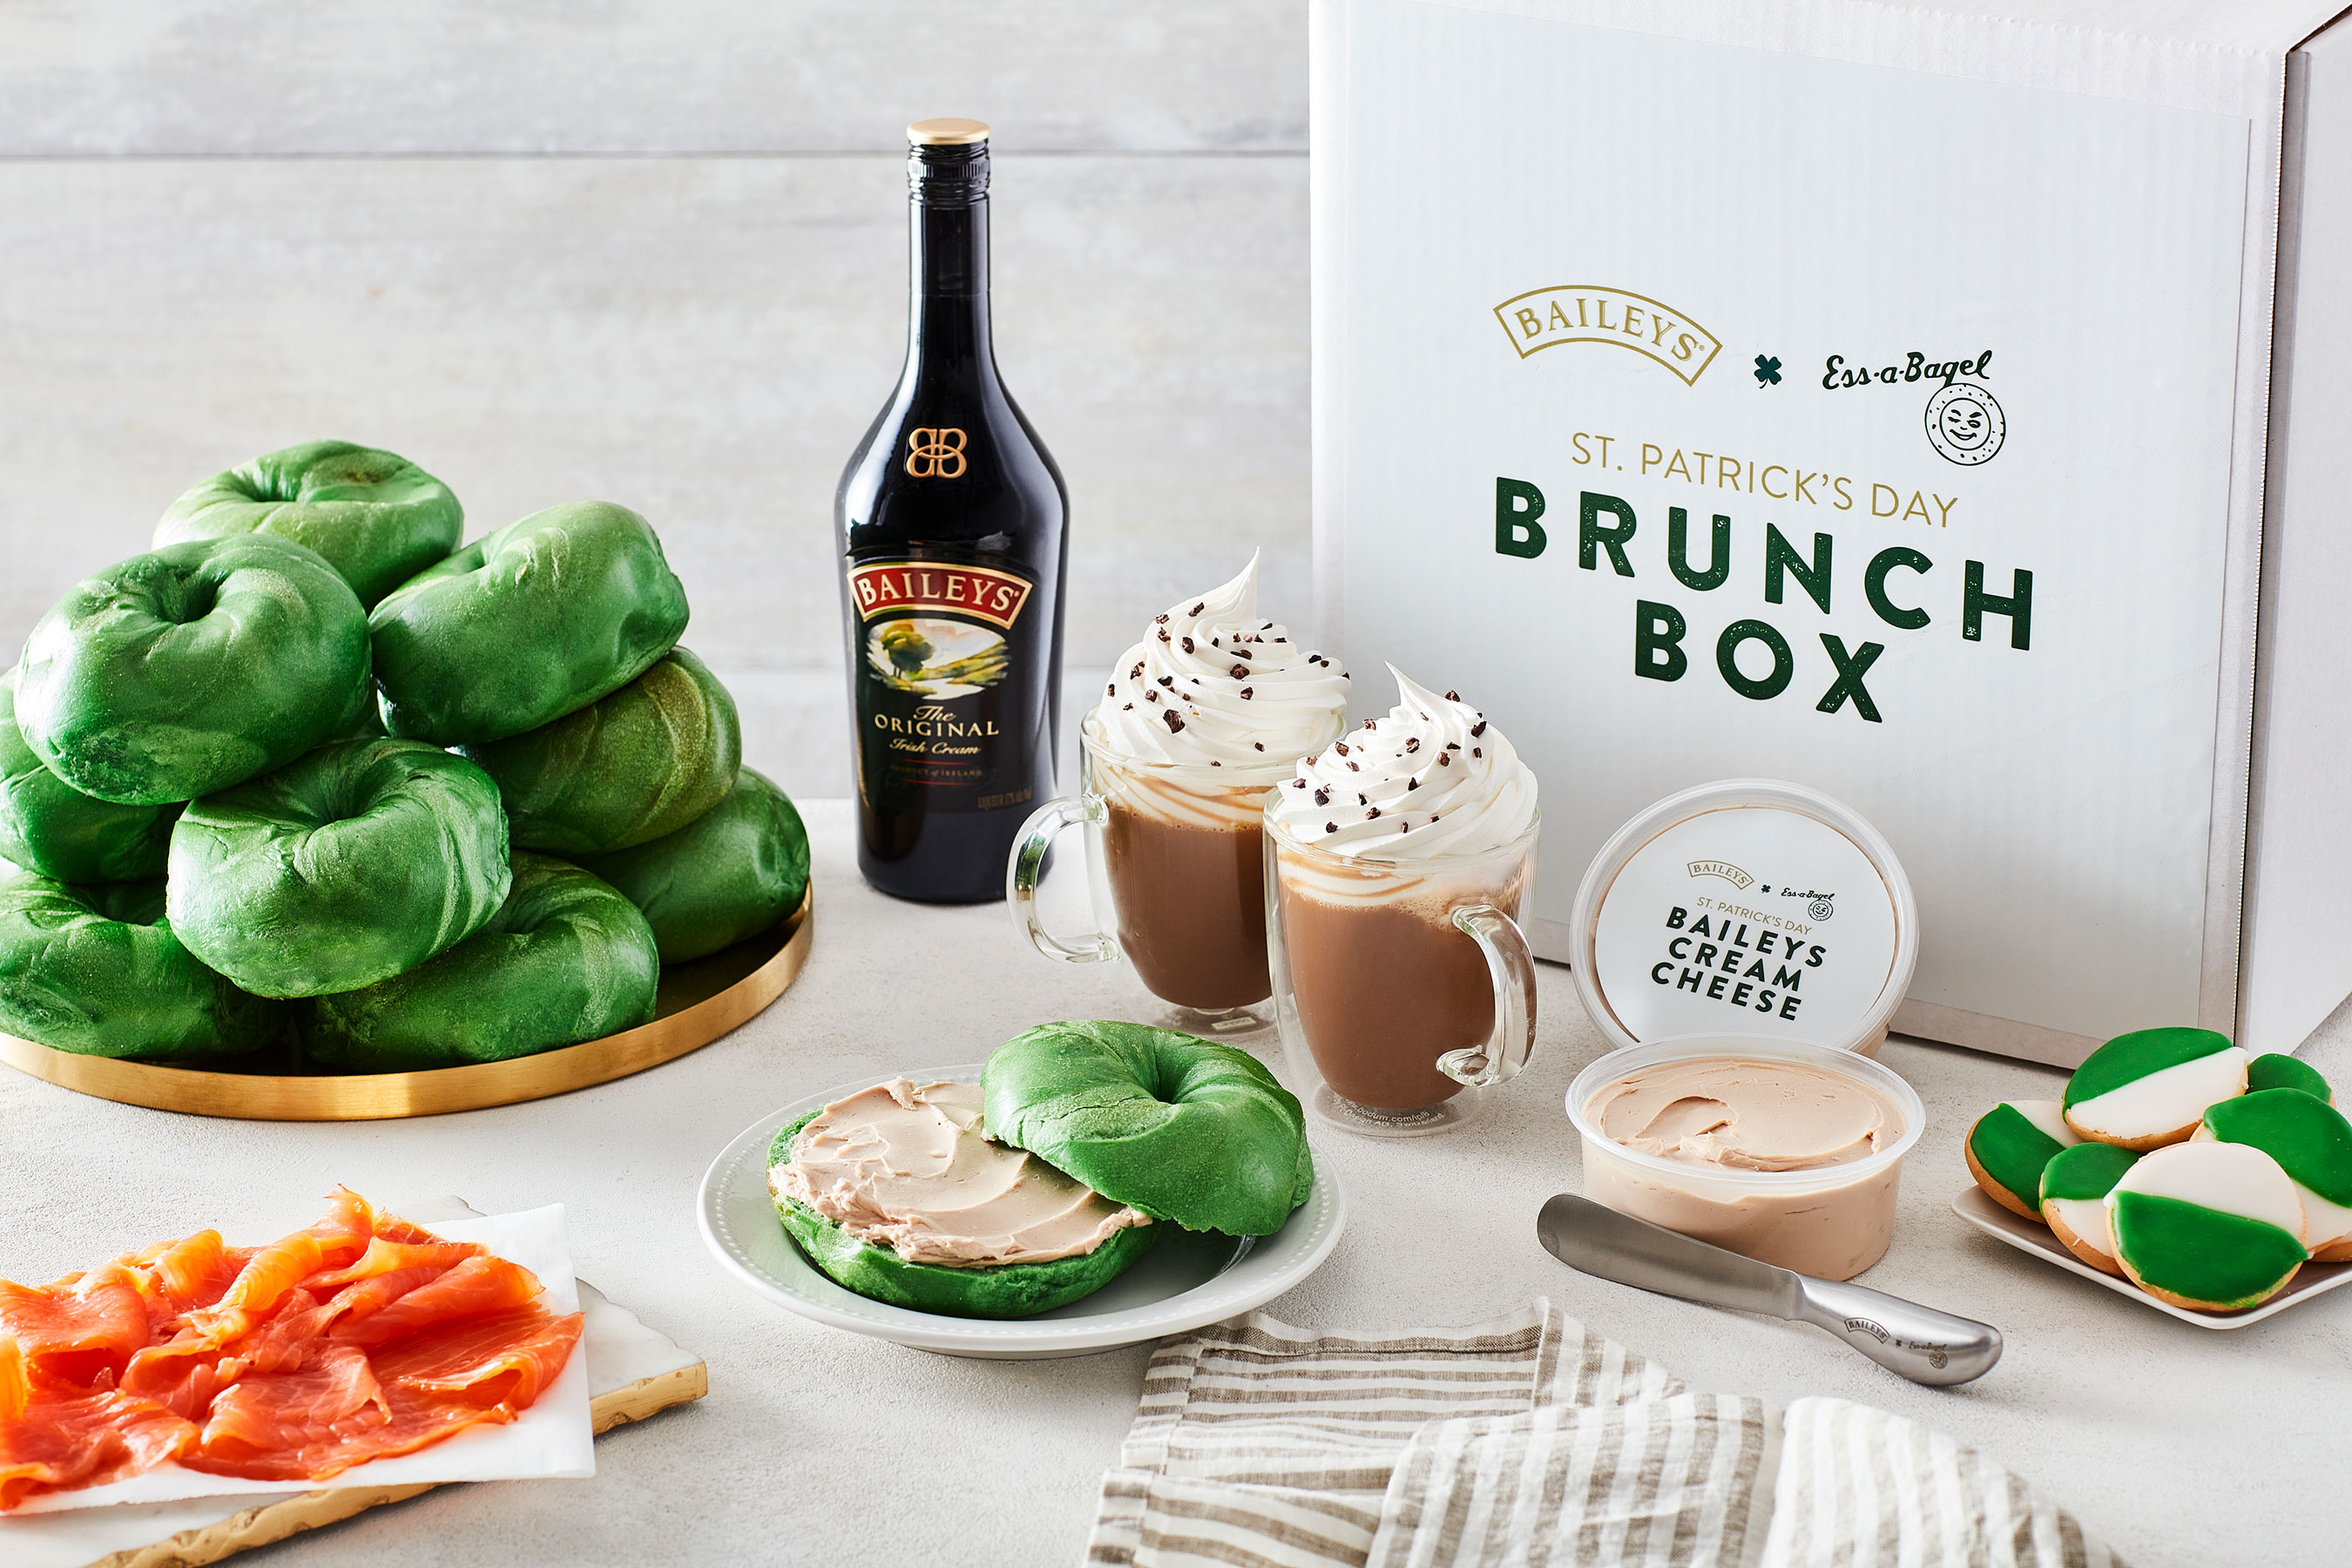 Introducing the Baileys x Ess-a-Bagel St. Patrick’s Day Brunch Box featuring the first-ever cream cheese infused with the flavor of Baileys Original Irish Cream Liqueur (non-alcoholic)!